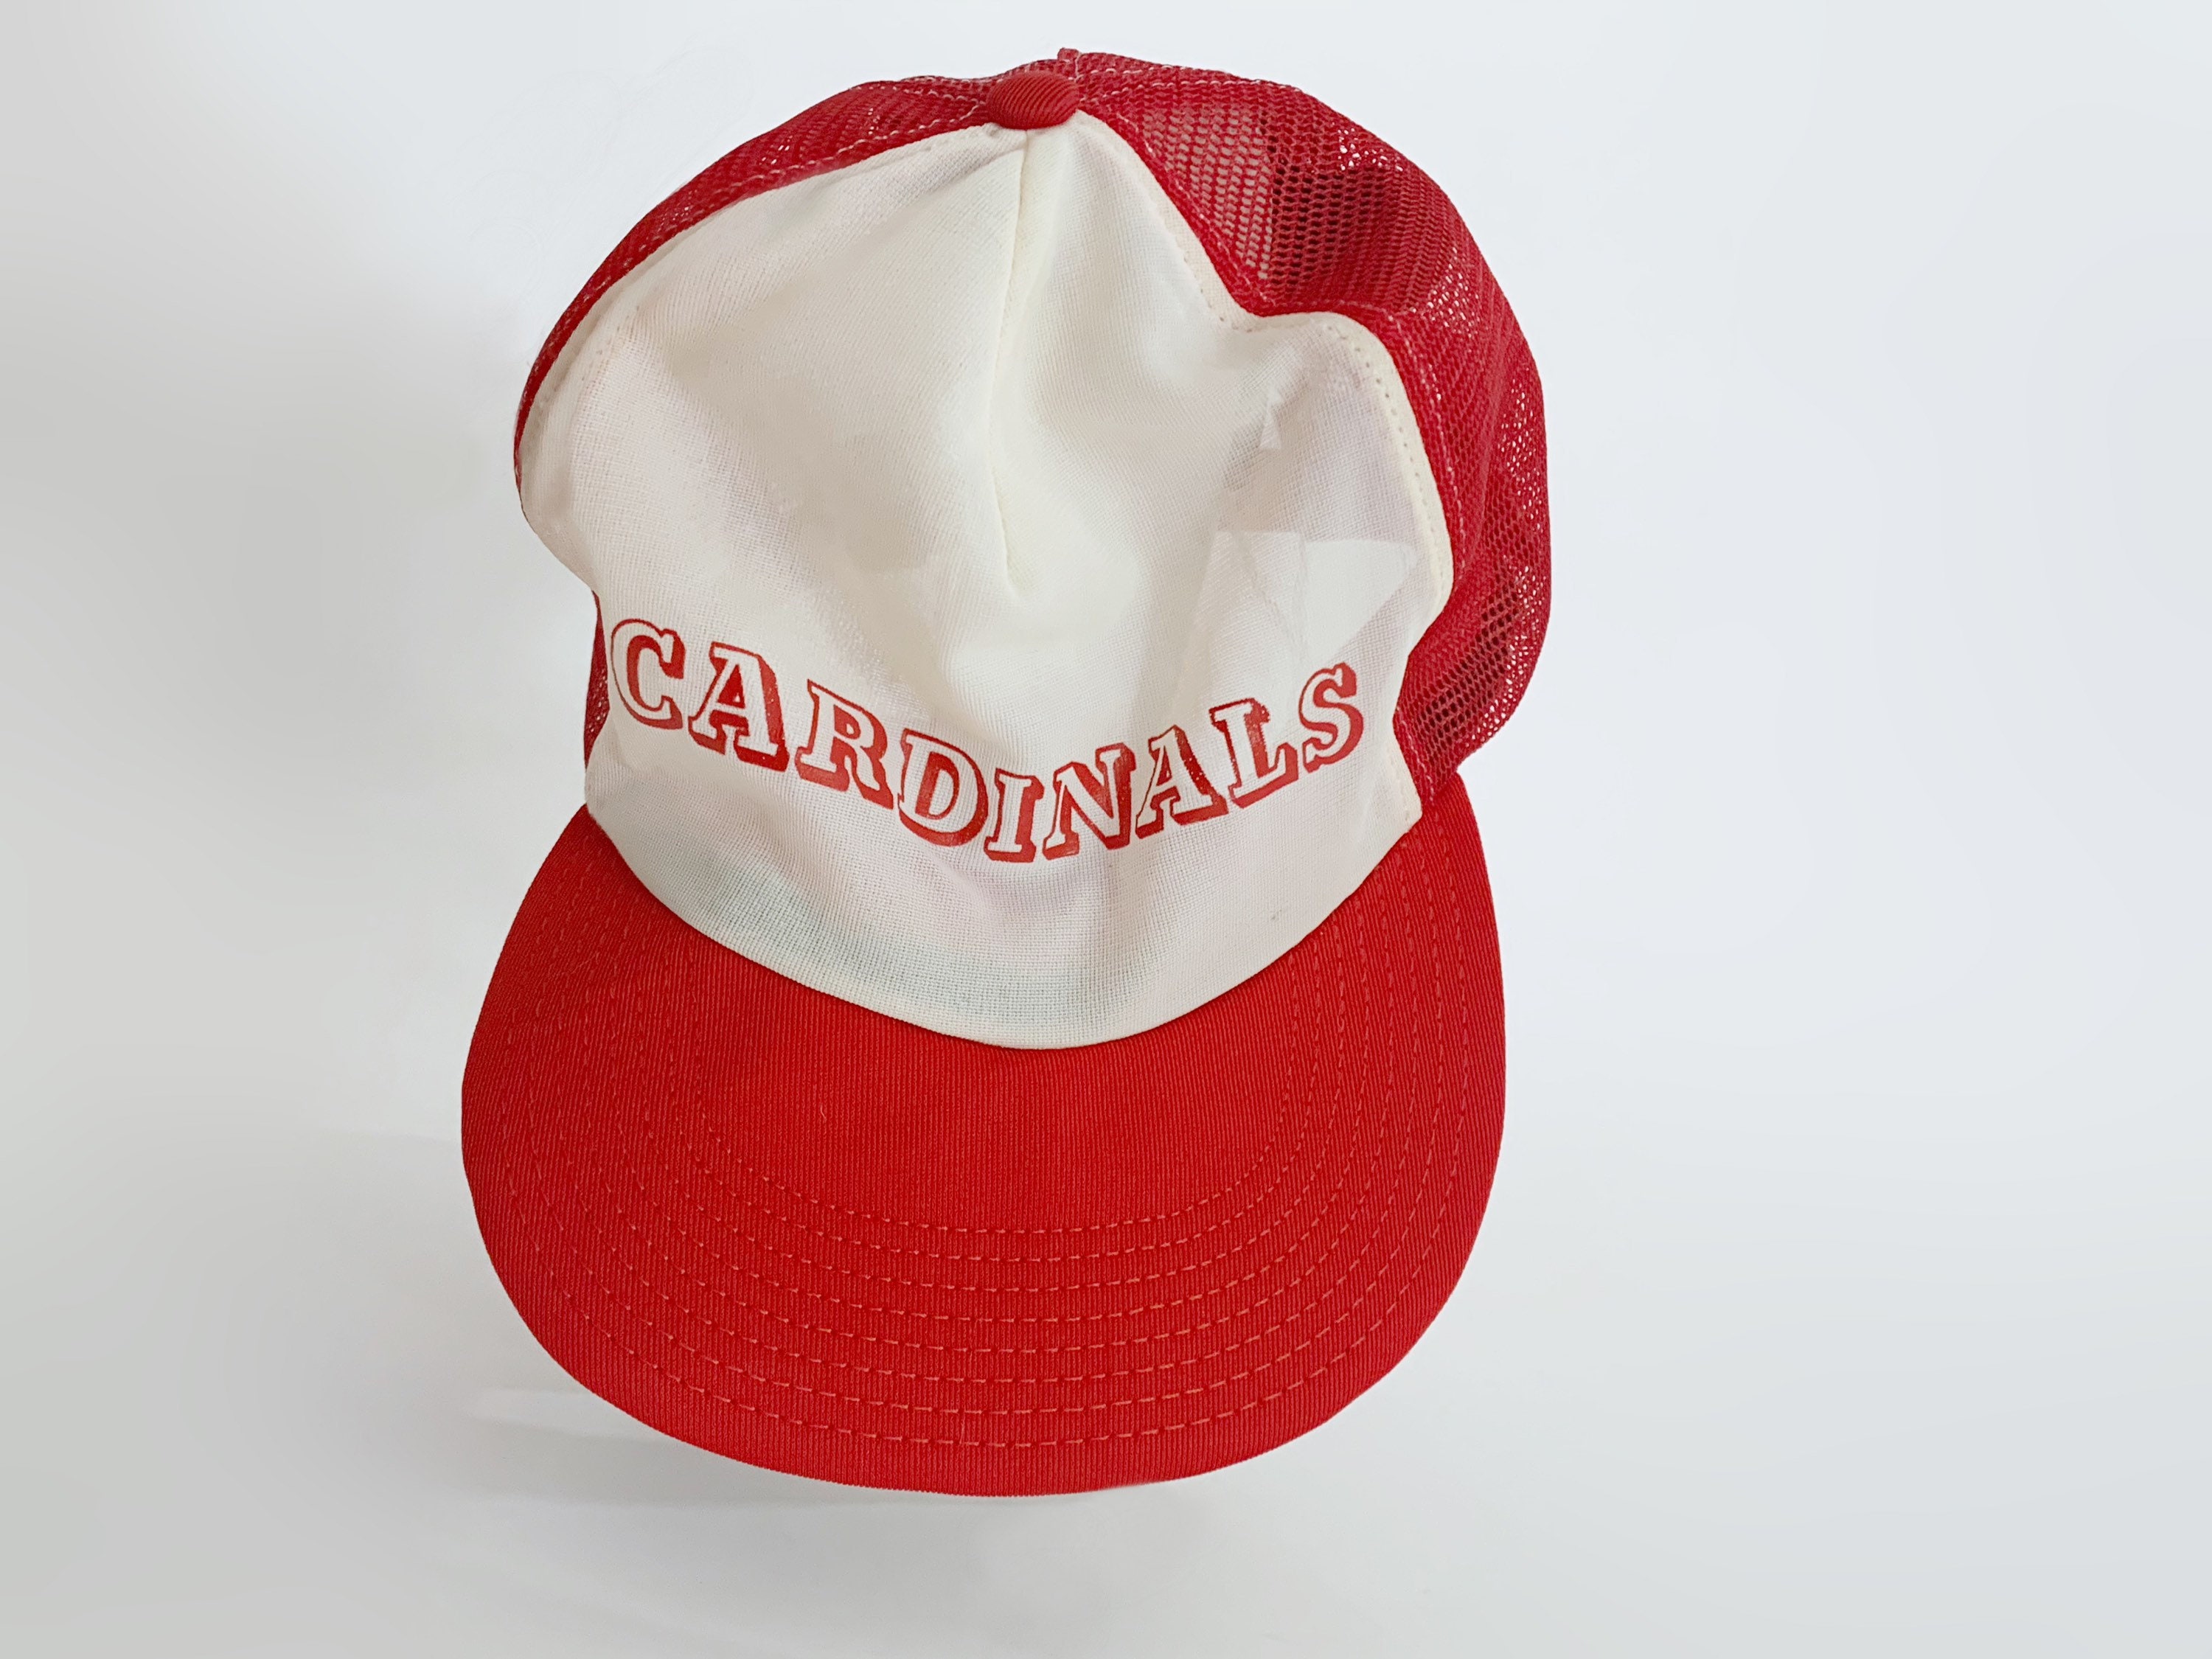 St. Louis Cardinal Red Baseball Cap Hat Red & White Bill Embroidered  Lettering